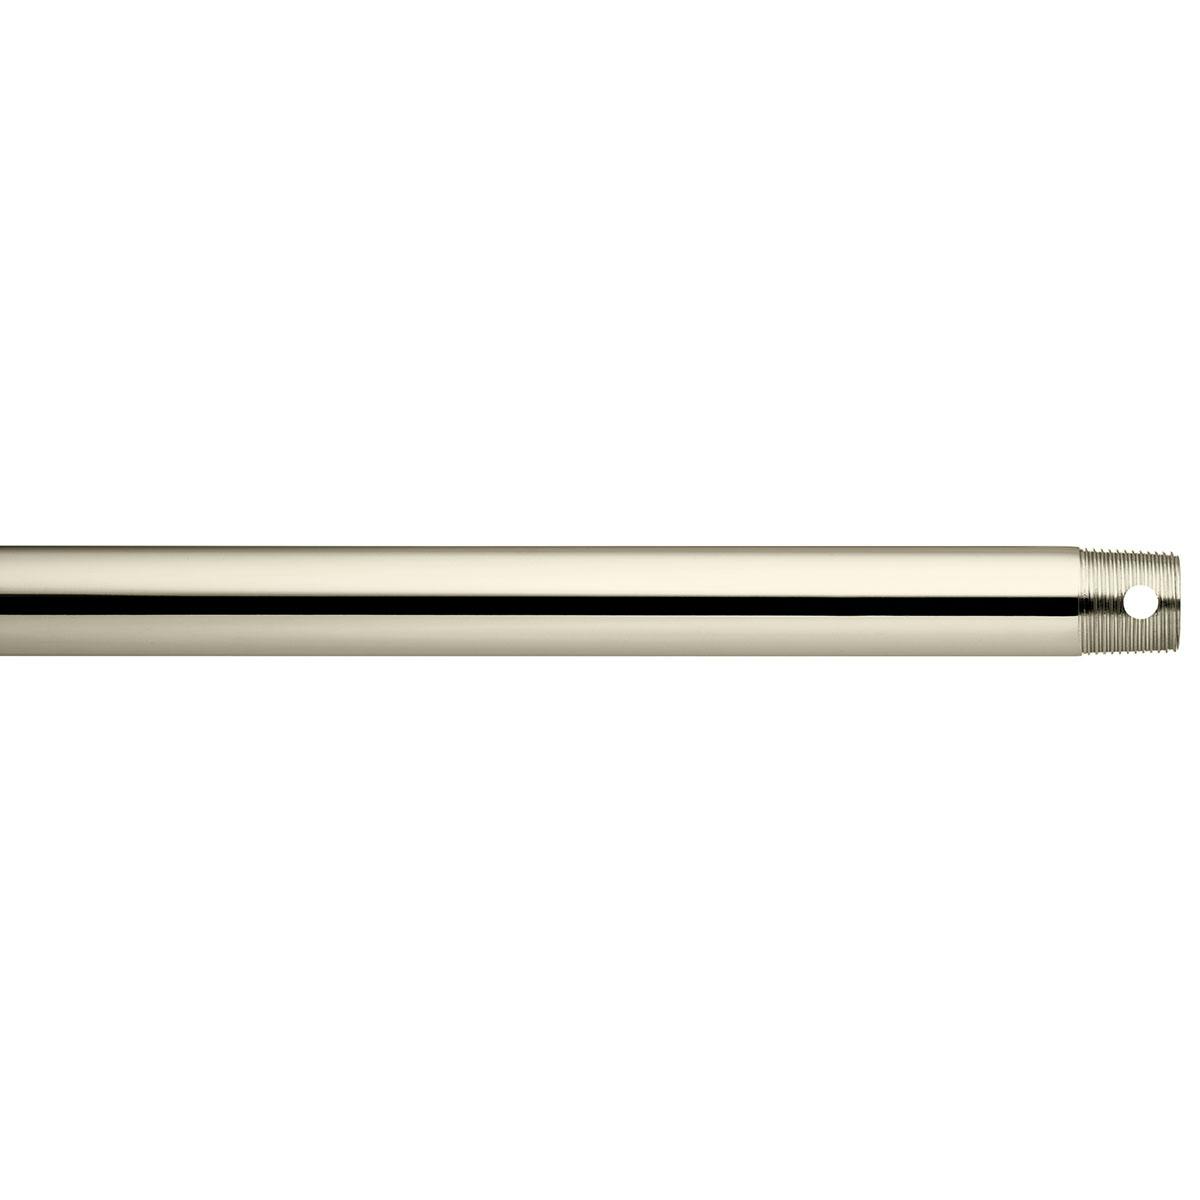 Dual Threaded 36" Downrod Polished Nickel on a white background